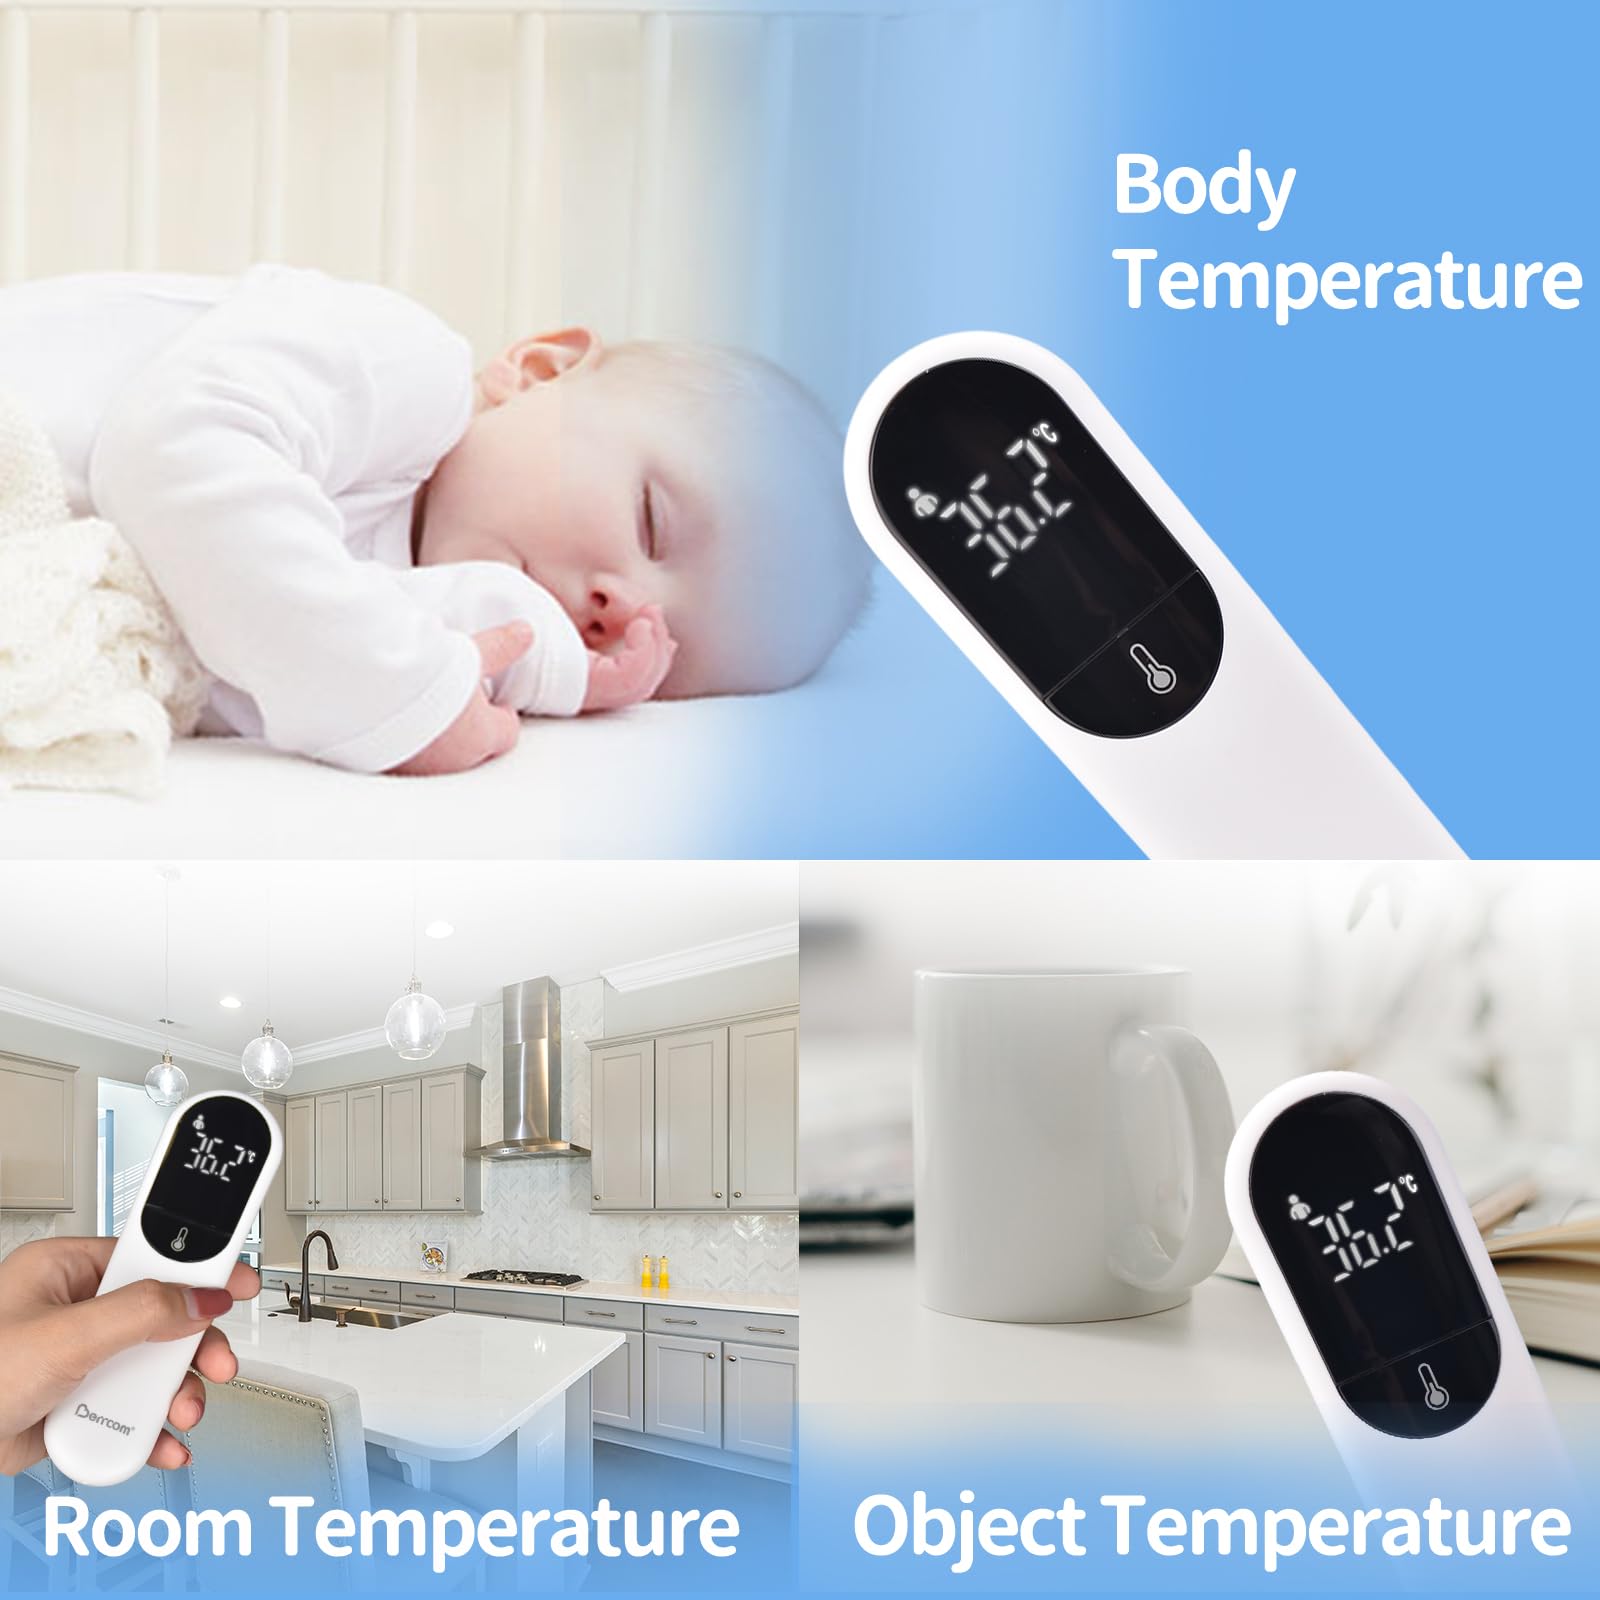 [Value Bundle] Berrcom No Touch Forehead Thermometer JXB315 & Berrcom Contactless Thermometer 3 in 1 for Adults and Kids JXB178